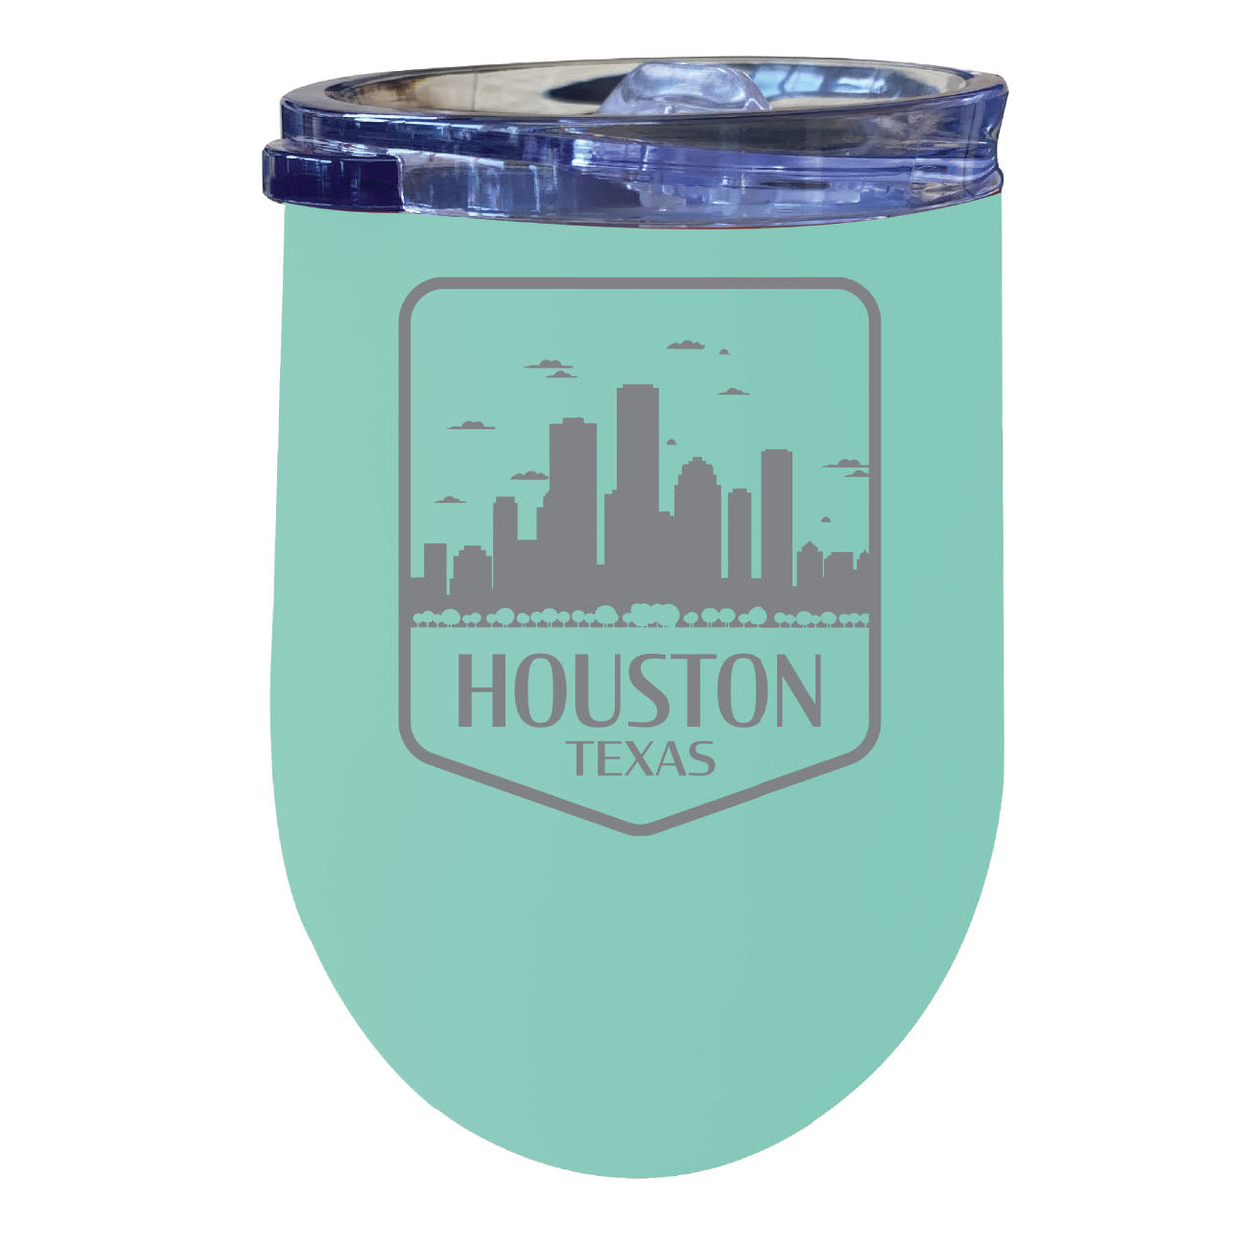 Houston Texas Souvenir 12 Oz Engraved Insulated Wine Stainless Steel Tumbler - Navy,,2-Pack